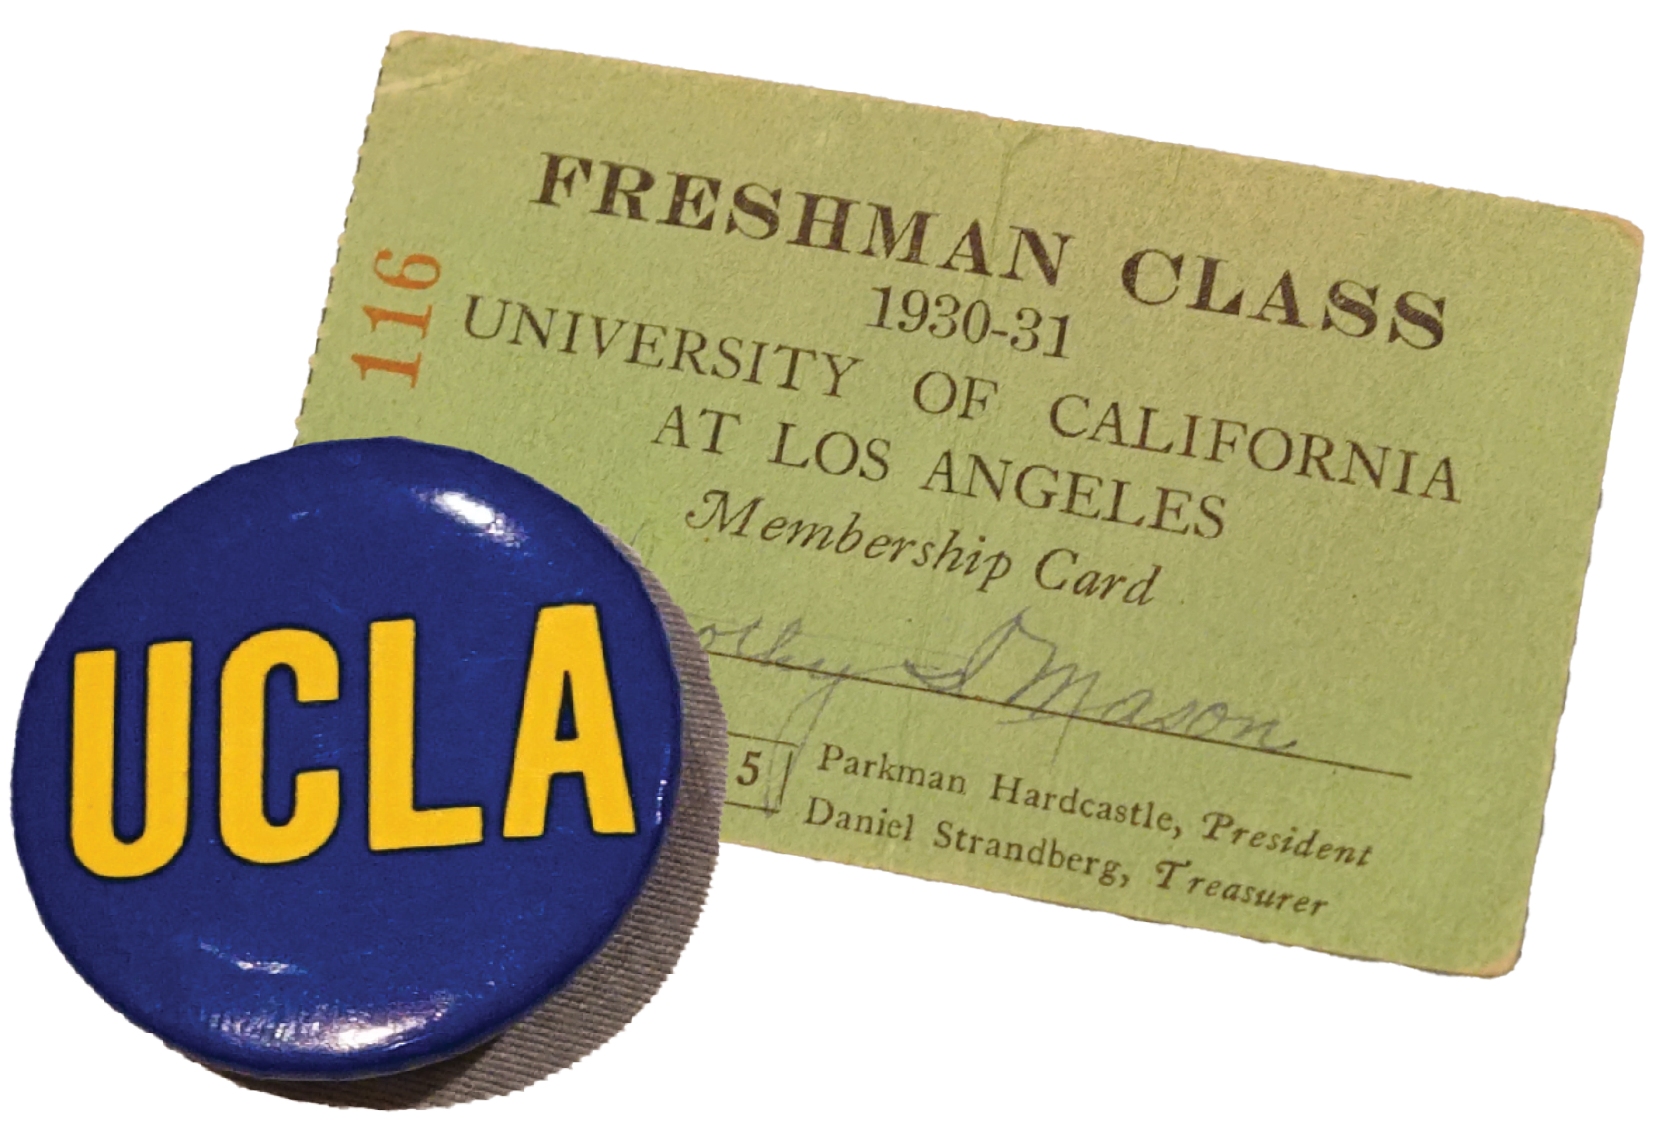 A yellow 1930-31 UCLA freshman class membership card and a blue pin-back button with "UCLA" spelled out in gold. ﻿